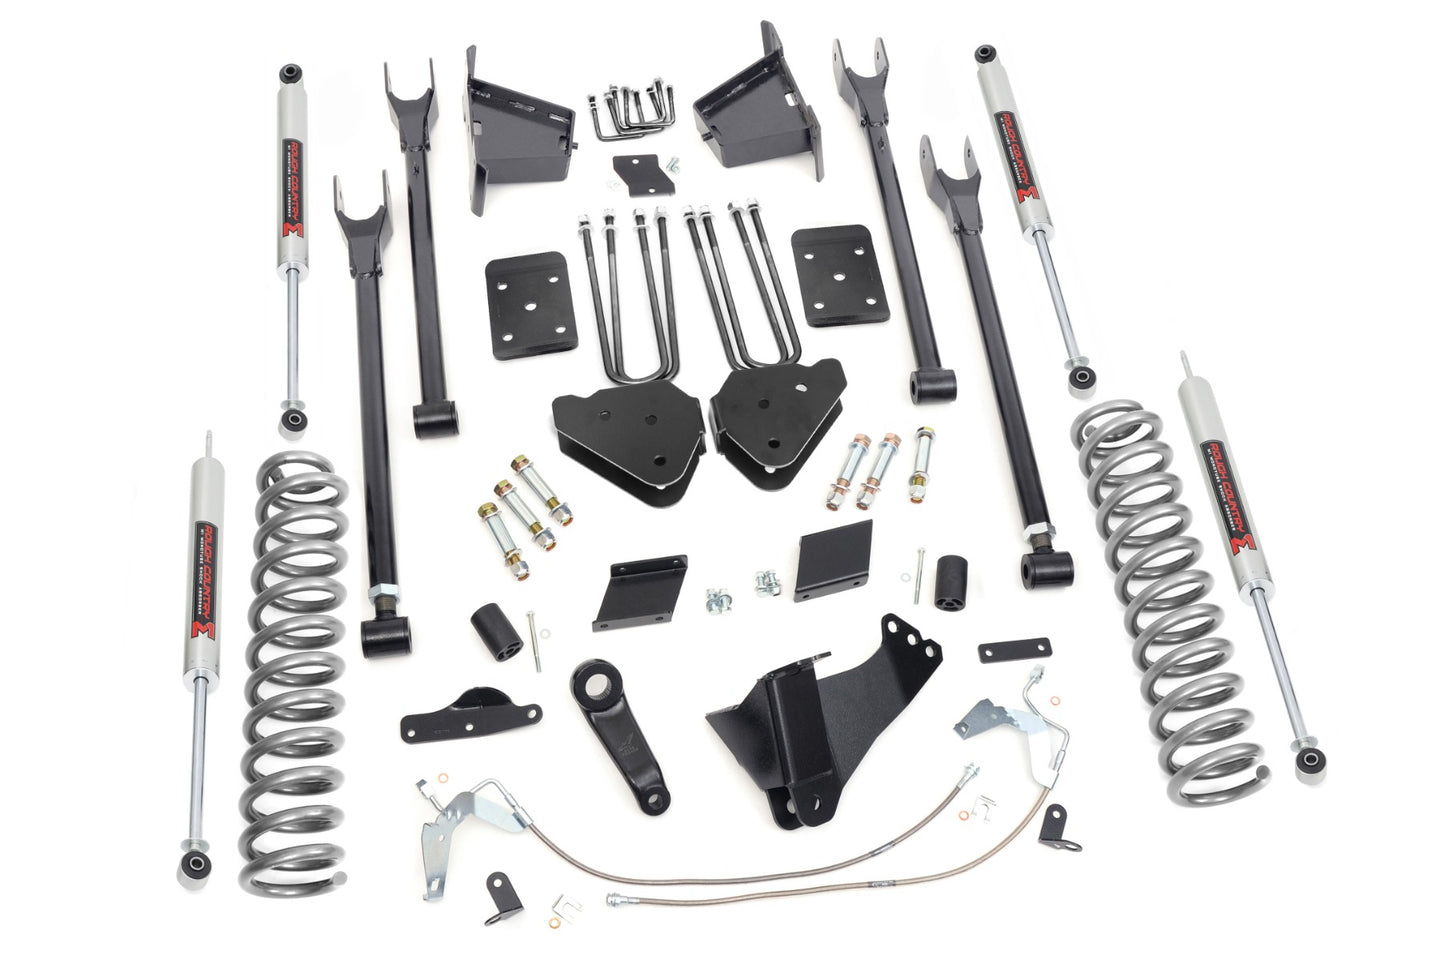 6 Inch Lift Kit | 4-Link | No OVLD | M1 | Ford F-250 Super Duty (11-14)